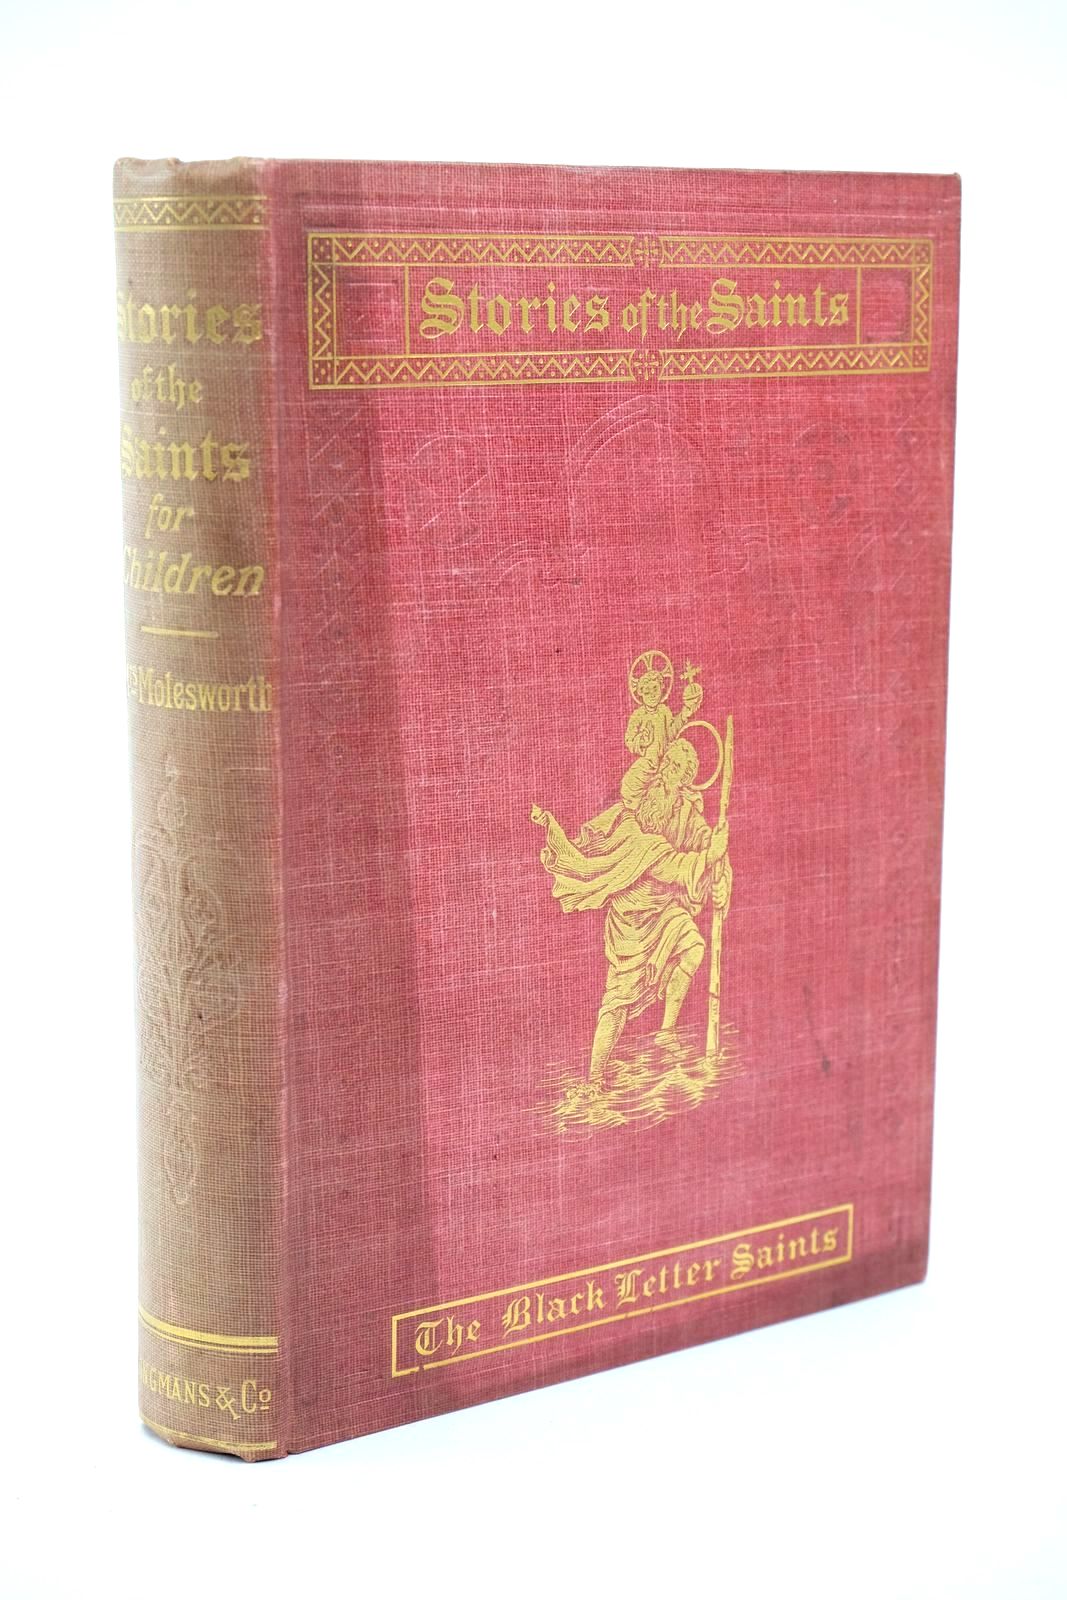 Photo of STORIES OF THE SAINTS FOR CHILDREN - THE BLACK LETTER SAINTS written by Molesworth, Mrs. published by Longmans, Green &amp; Co. (STOCK CODE: 1322905)  for sale by Stella & Rose's Books